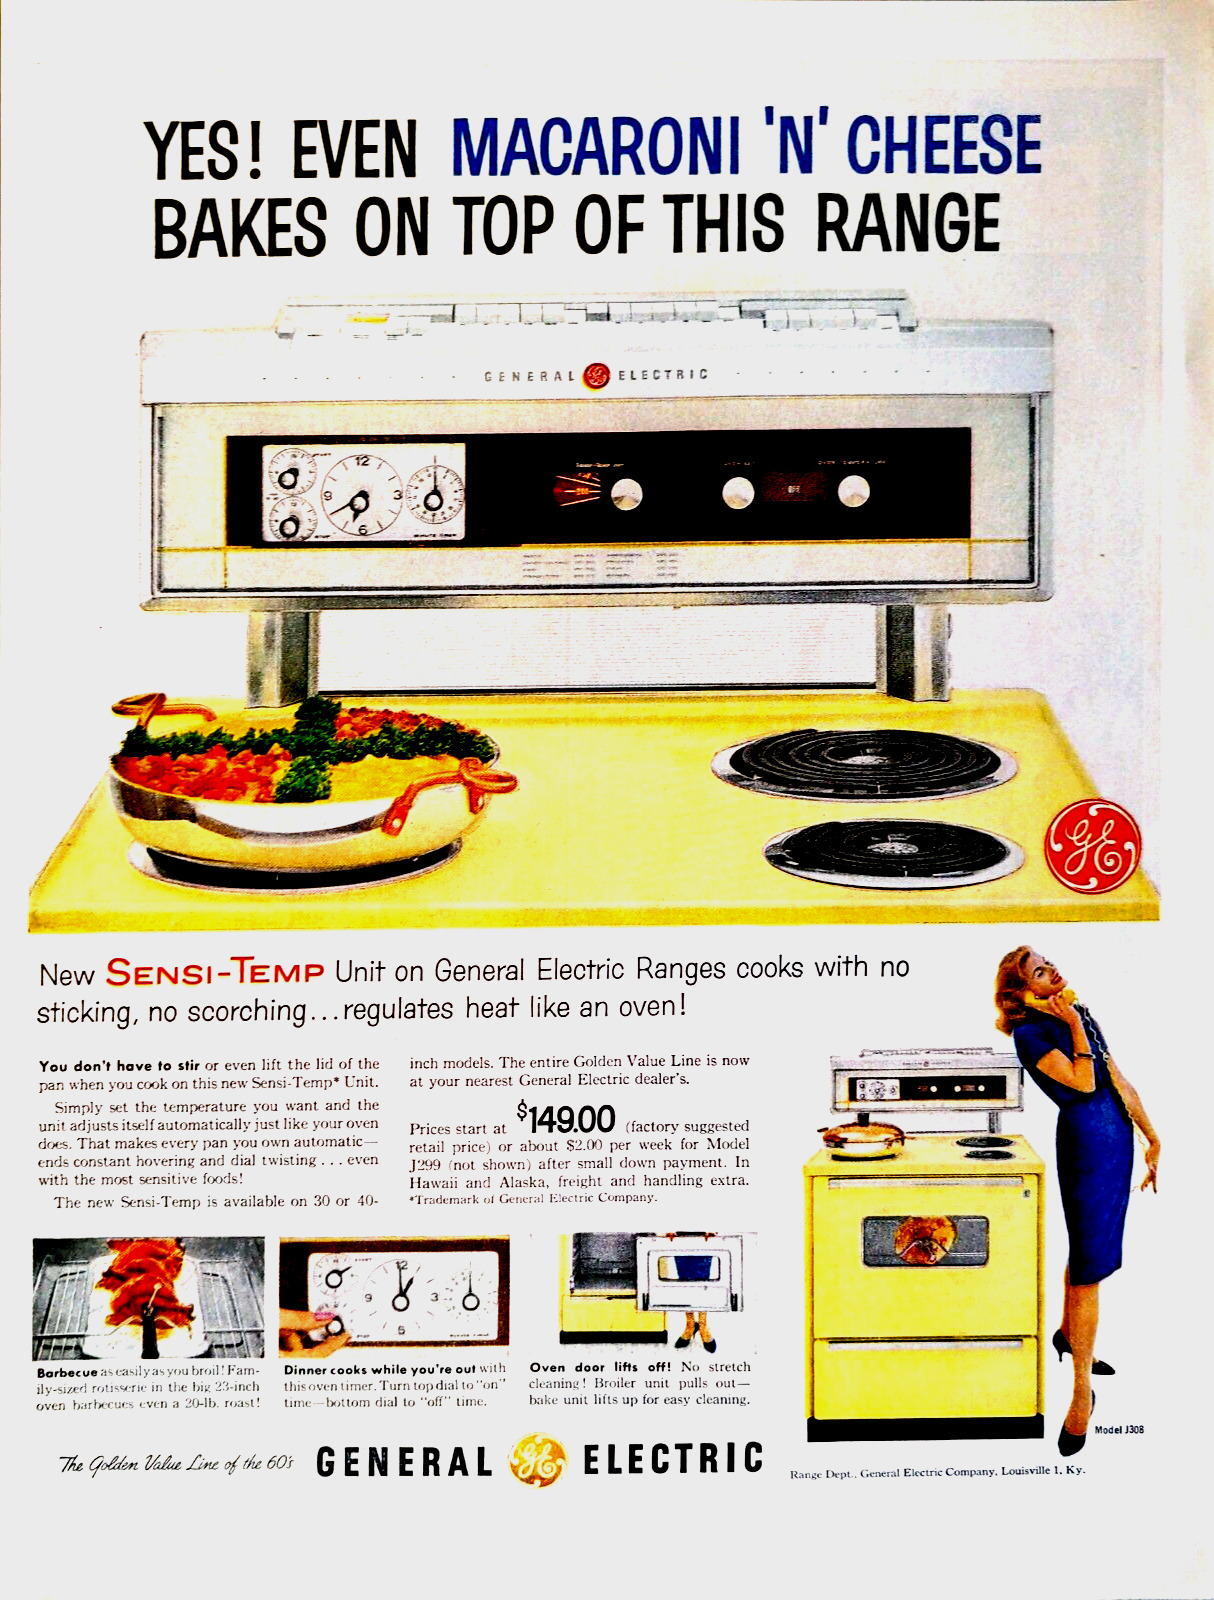 1960 General Electric MCM Yellow Stove Cooks No Sticking Scorching Print Ad